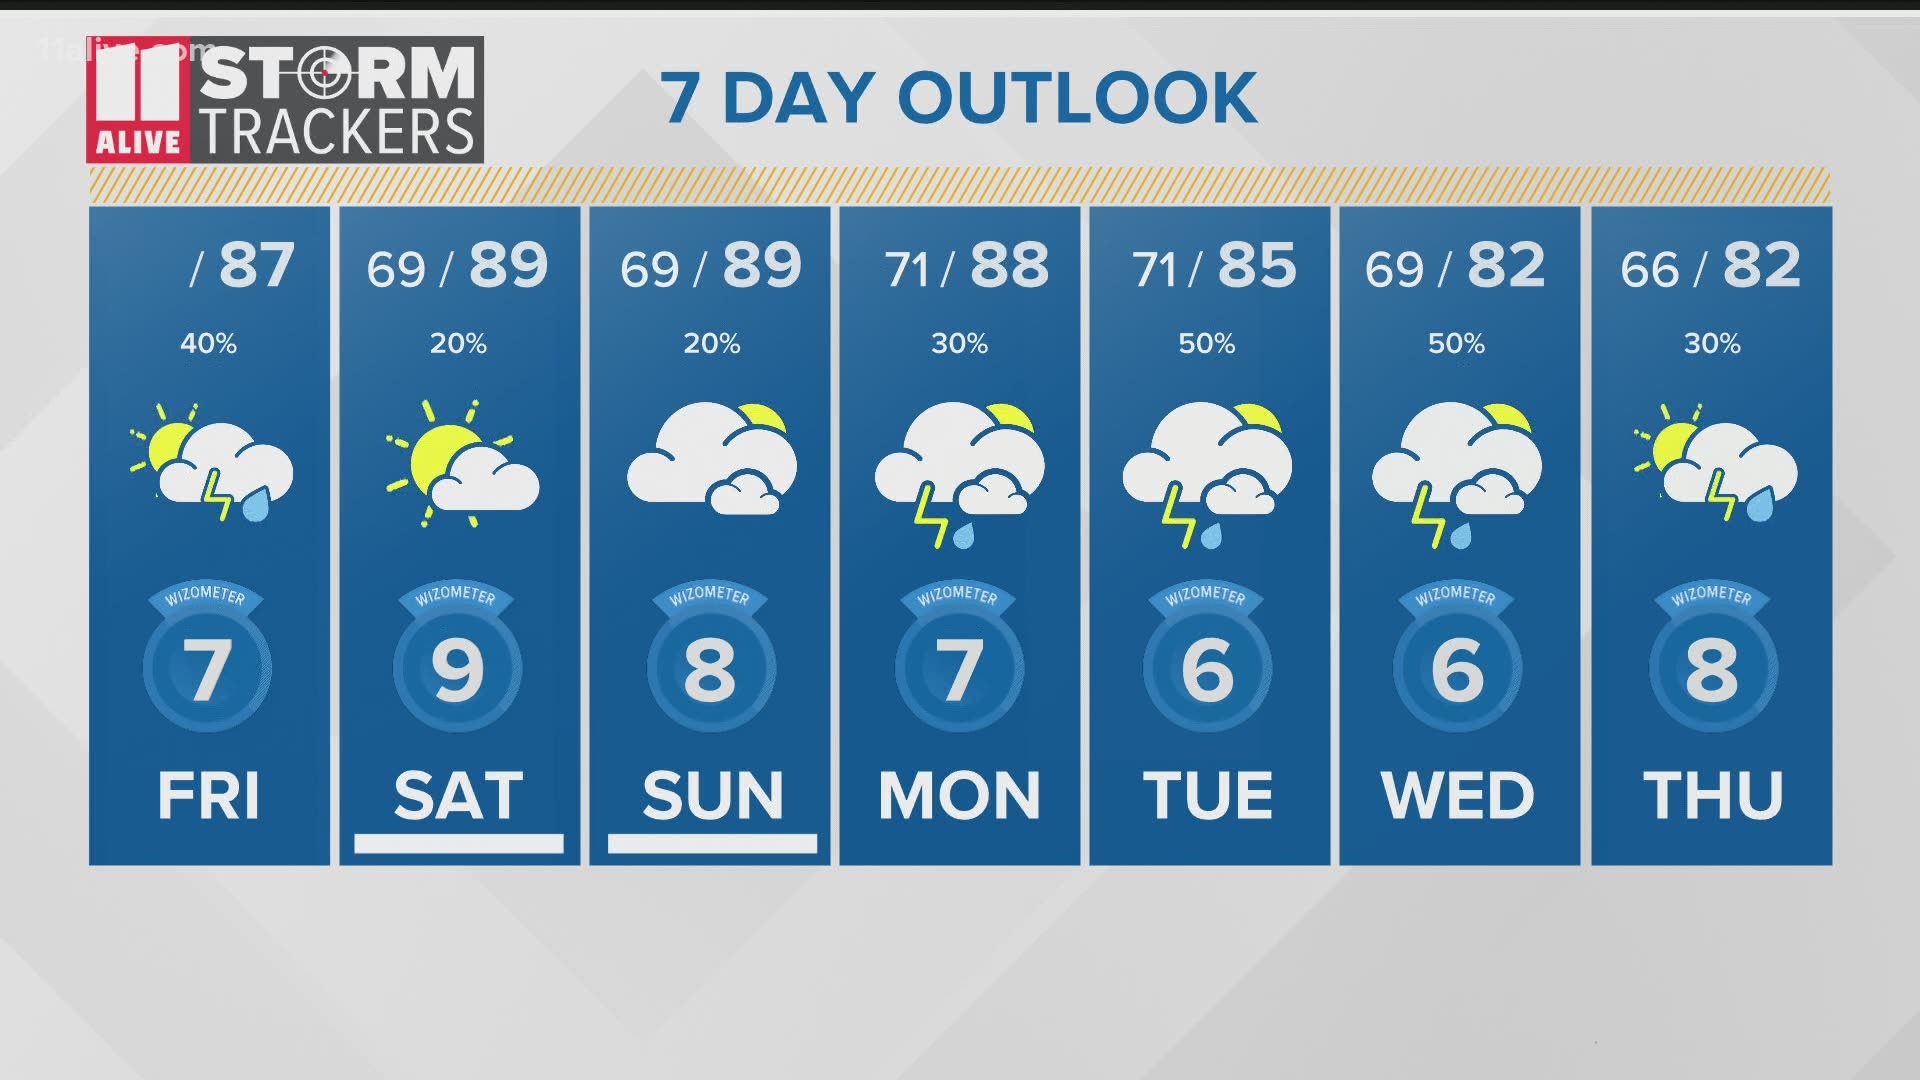 Atlanta weather | Storms possible Friday | 11alive.com